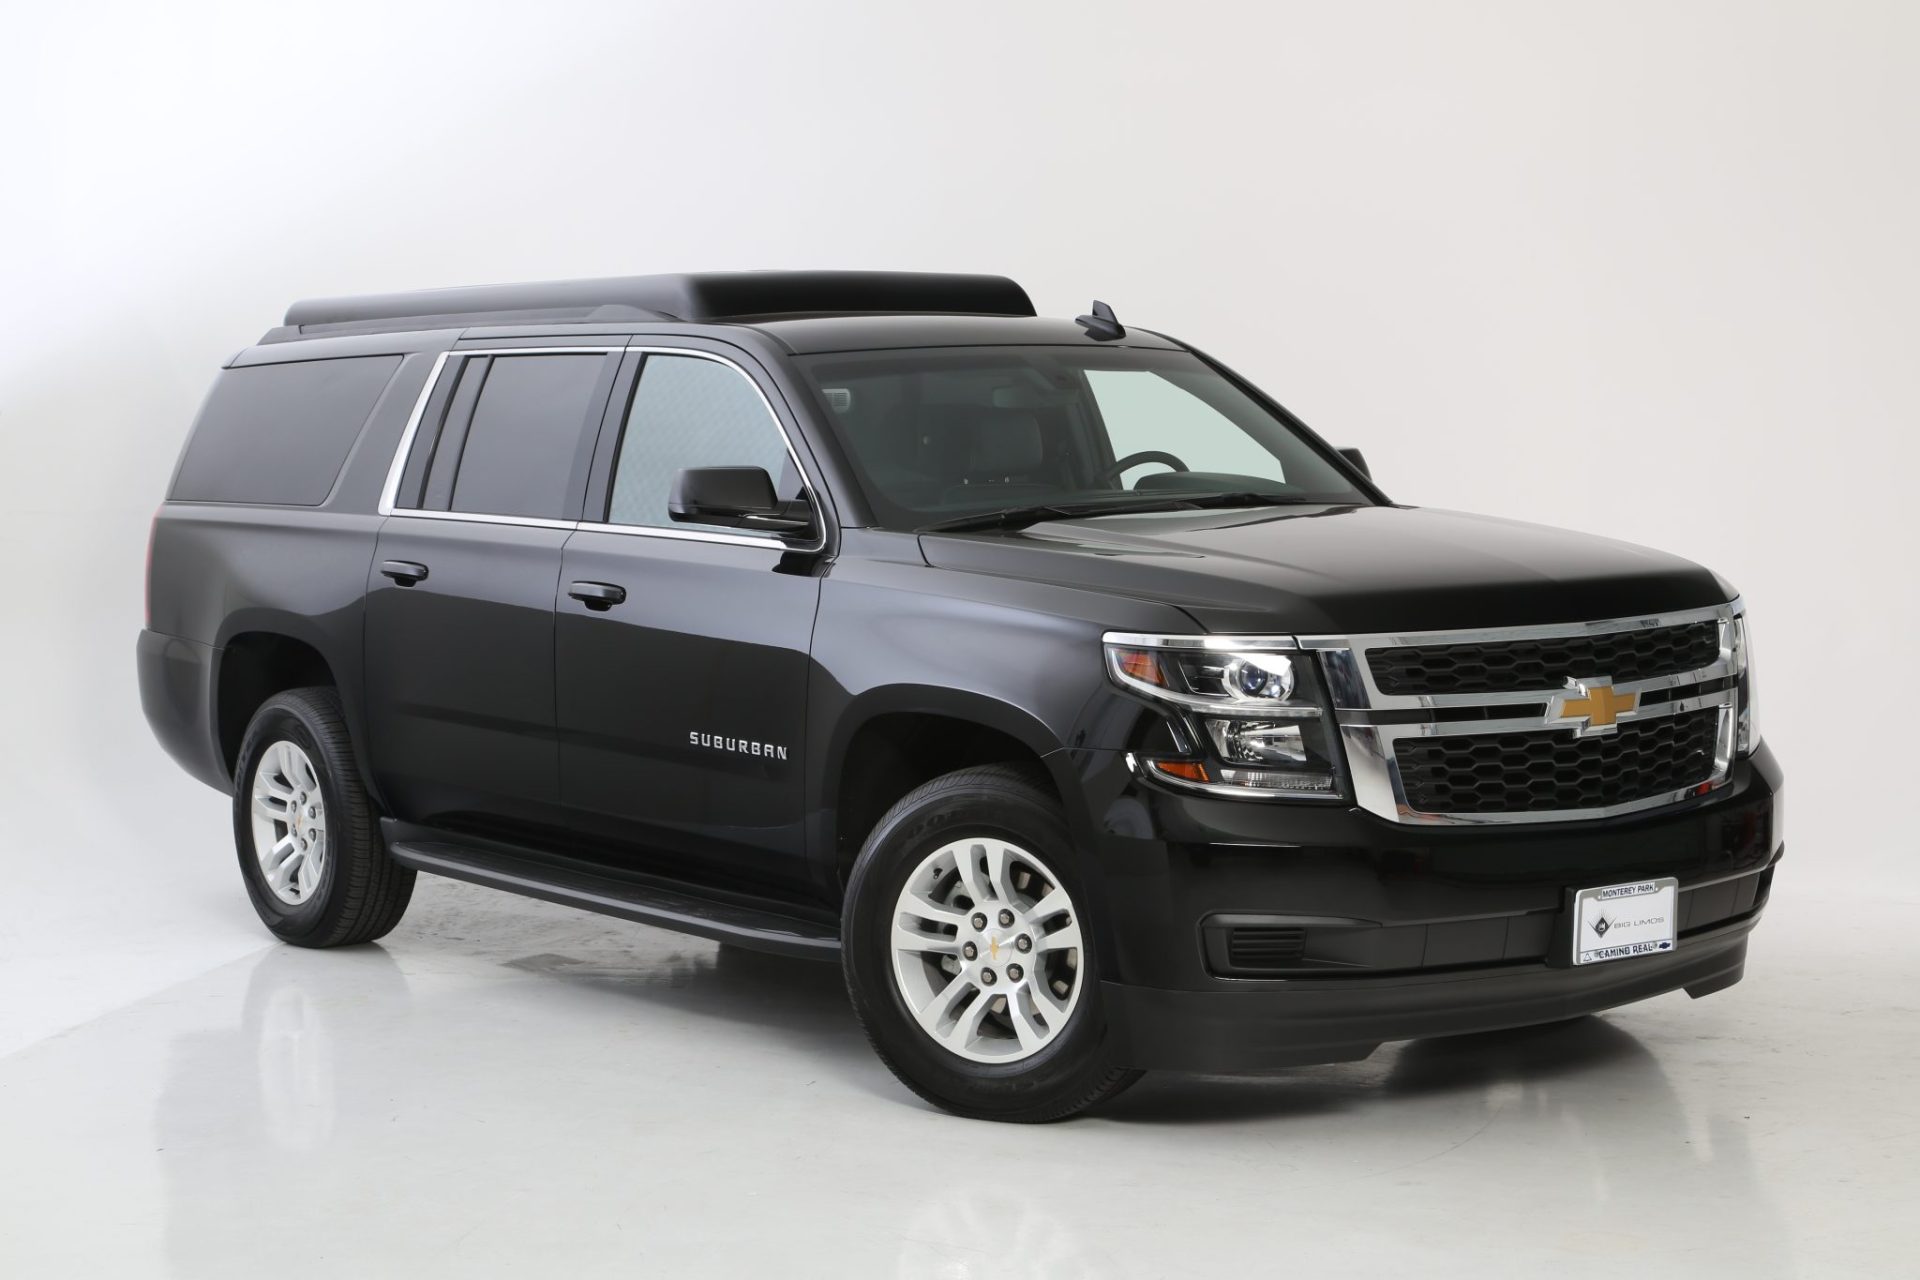 Chevy Suburban CEO Mobile Office Limousine